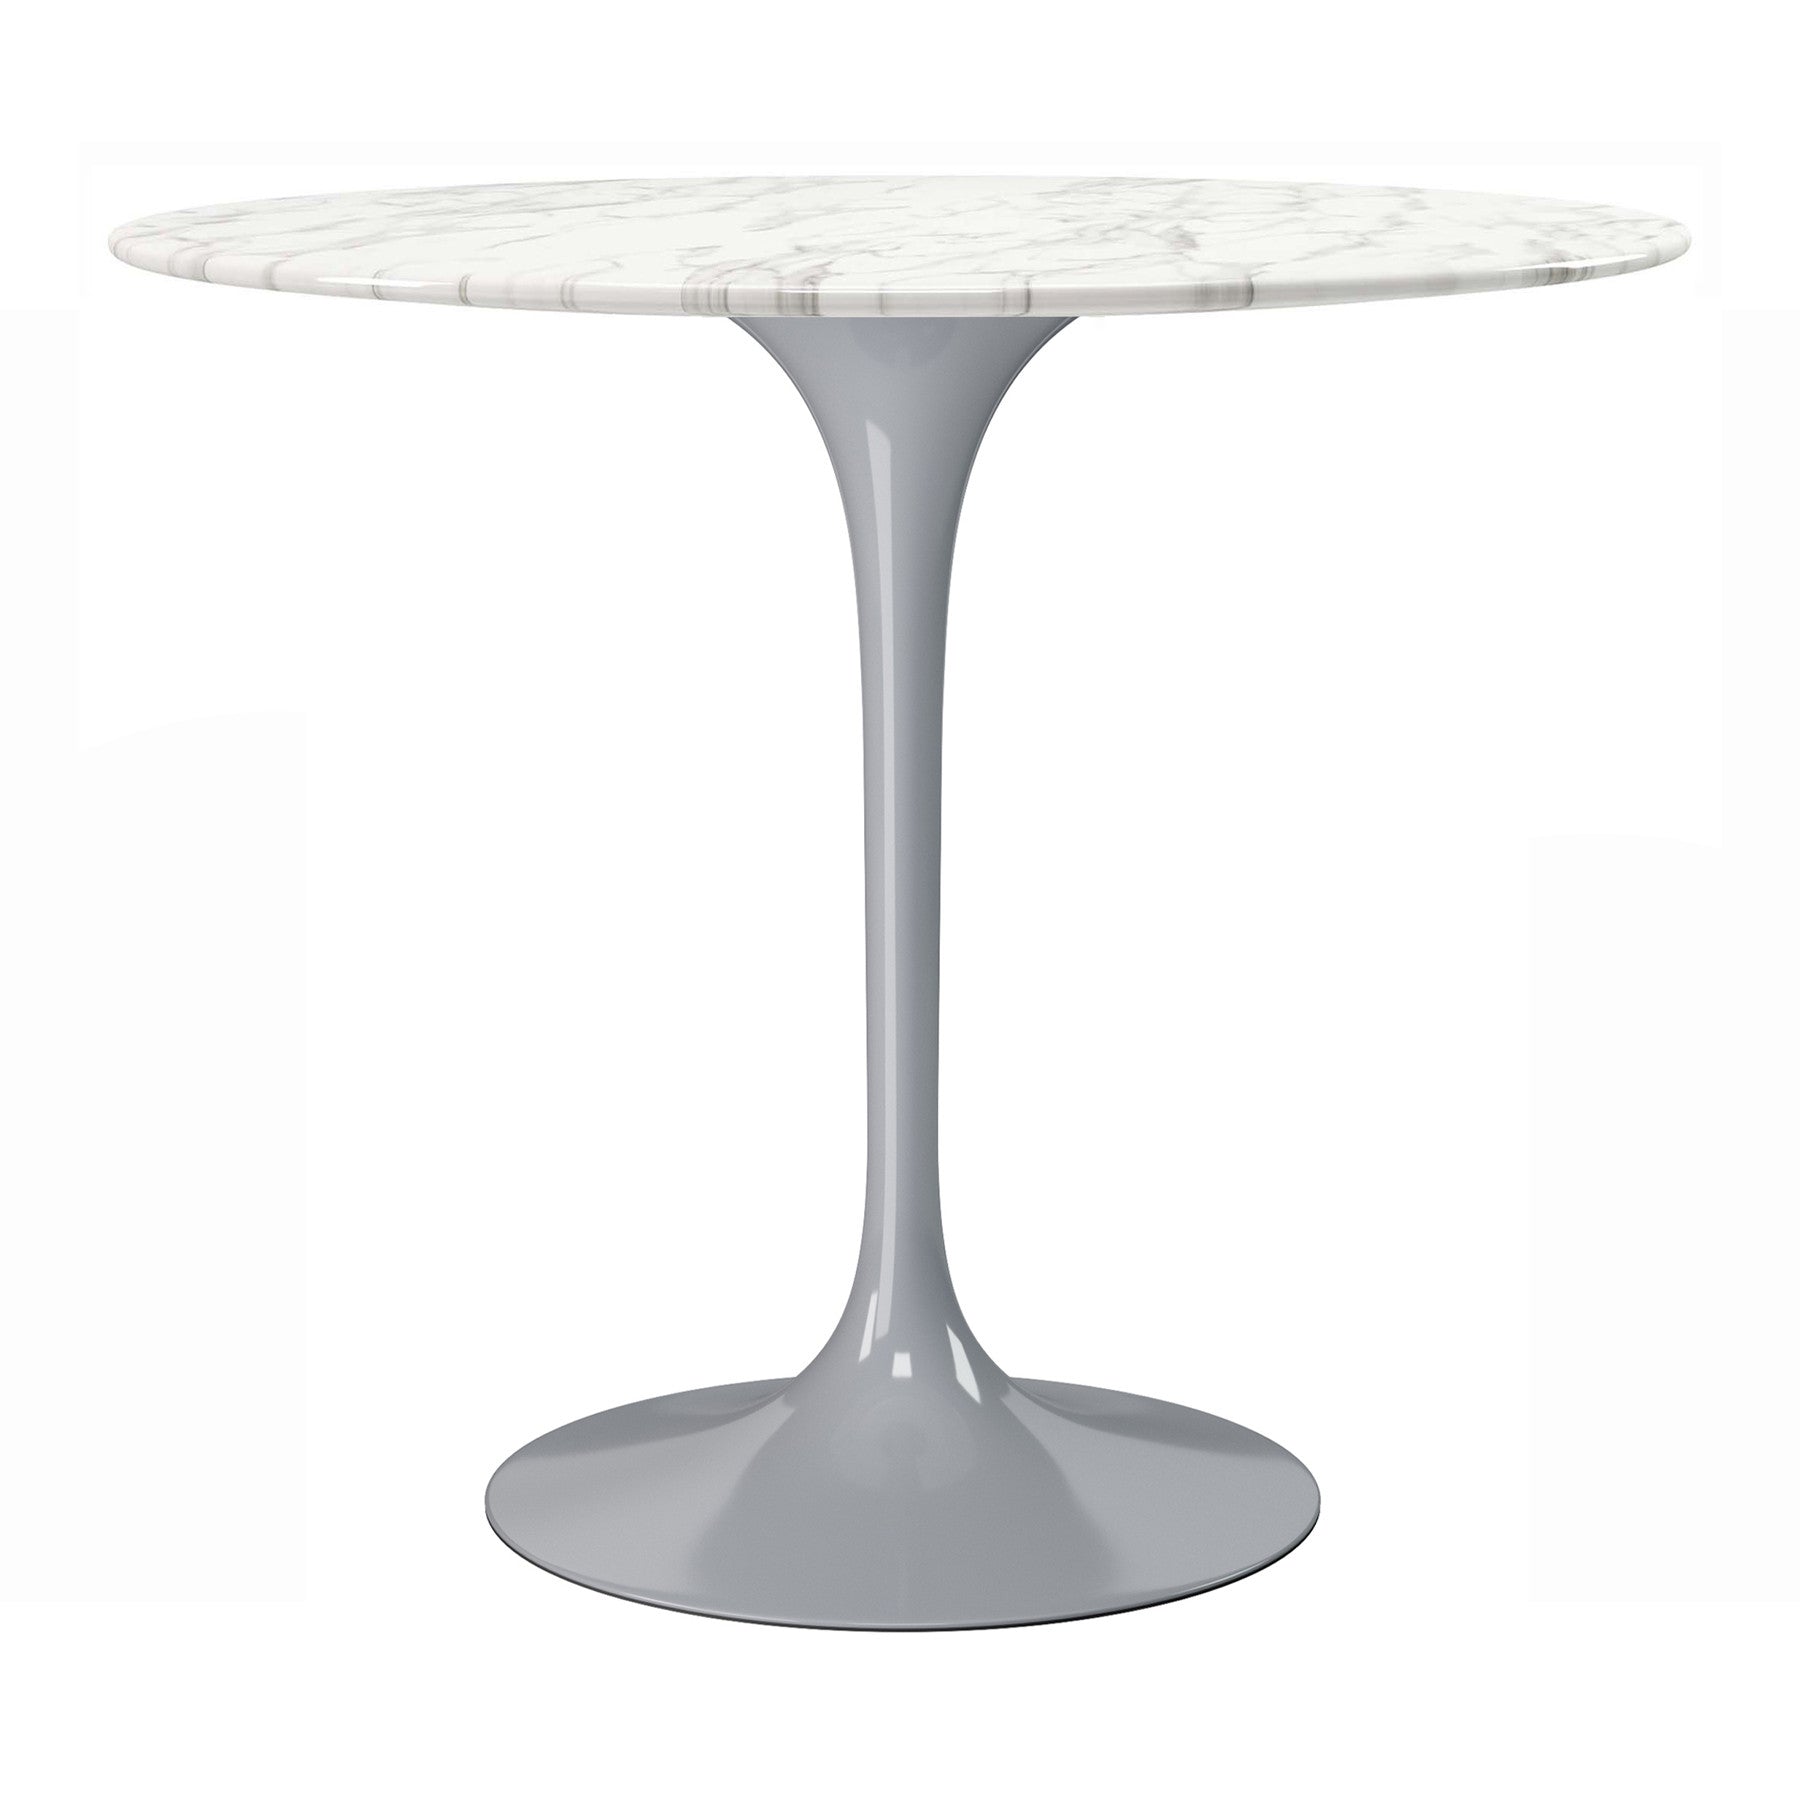 32" White And Gray Marble And Metal Dining Table